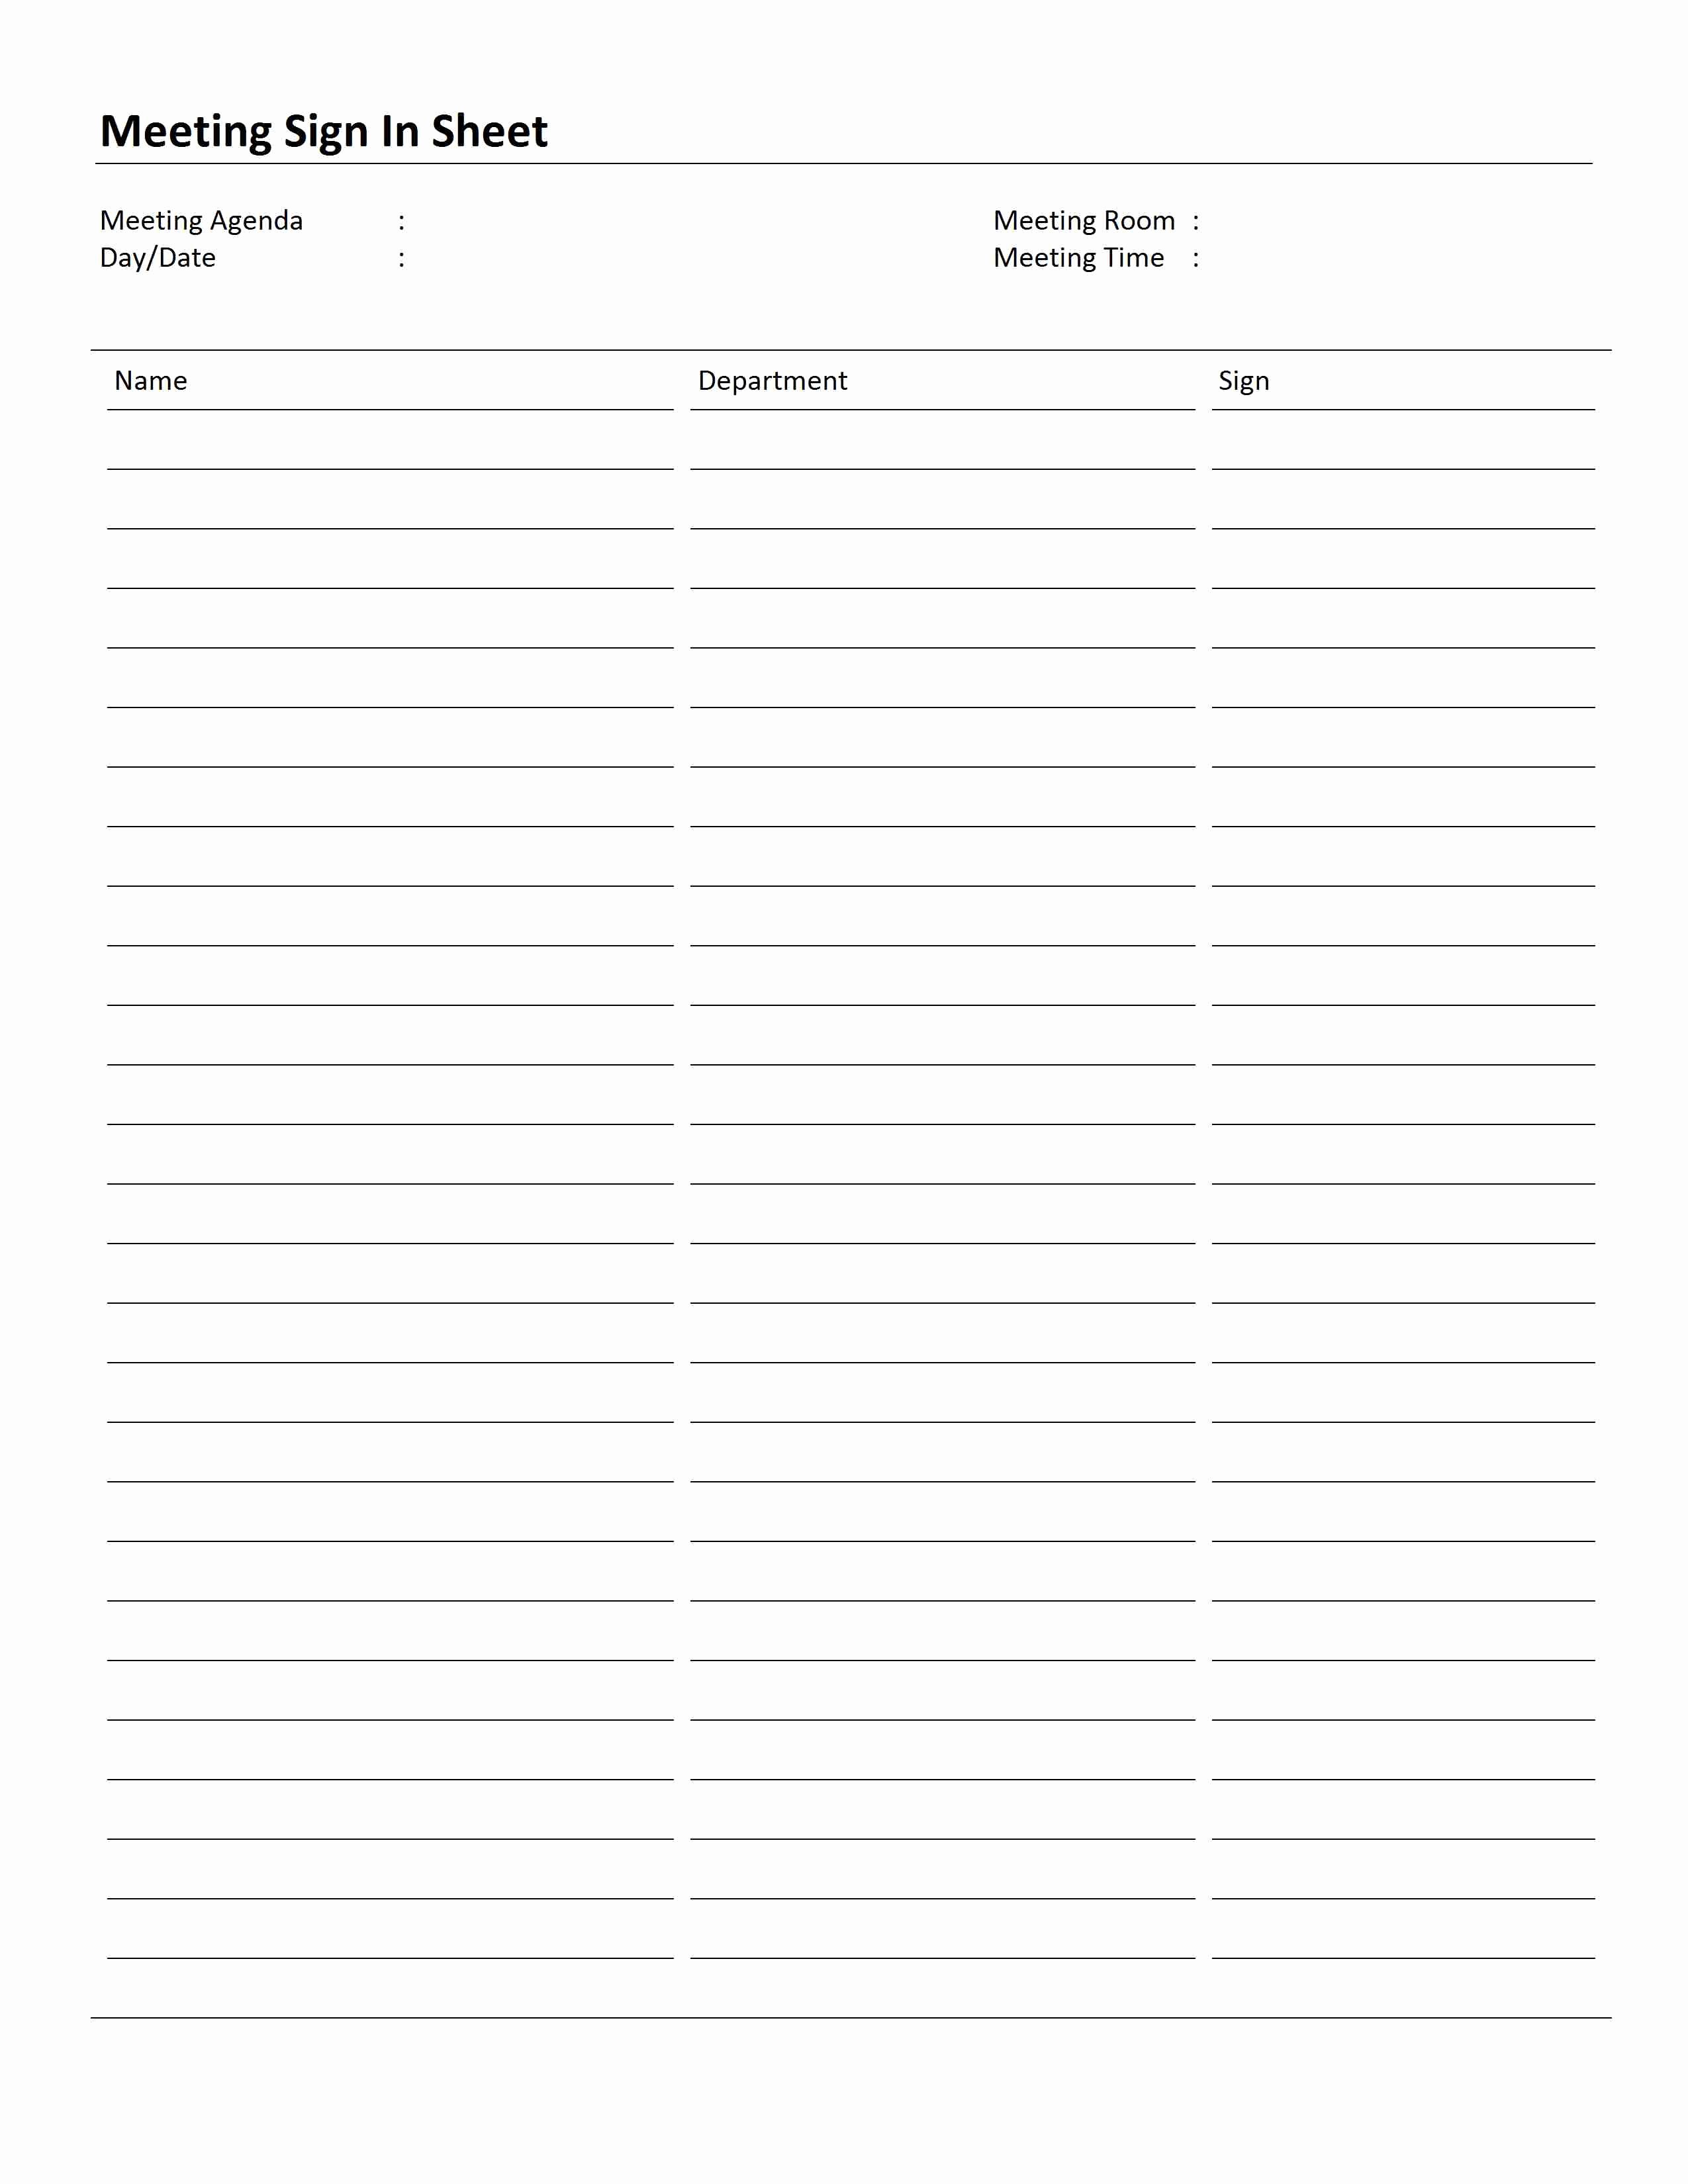 Parent Meeting Sign In Sheet Luxury Meeting Sign In Sheet